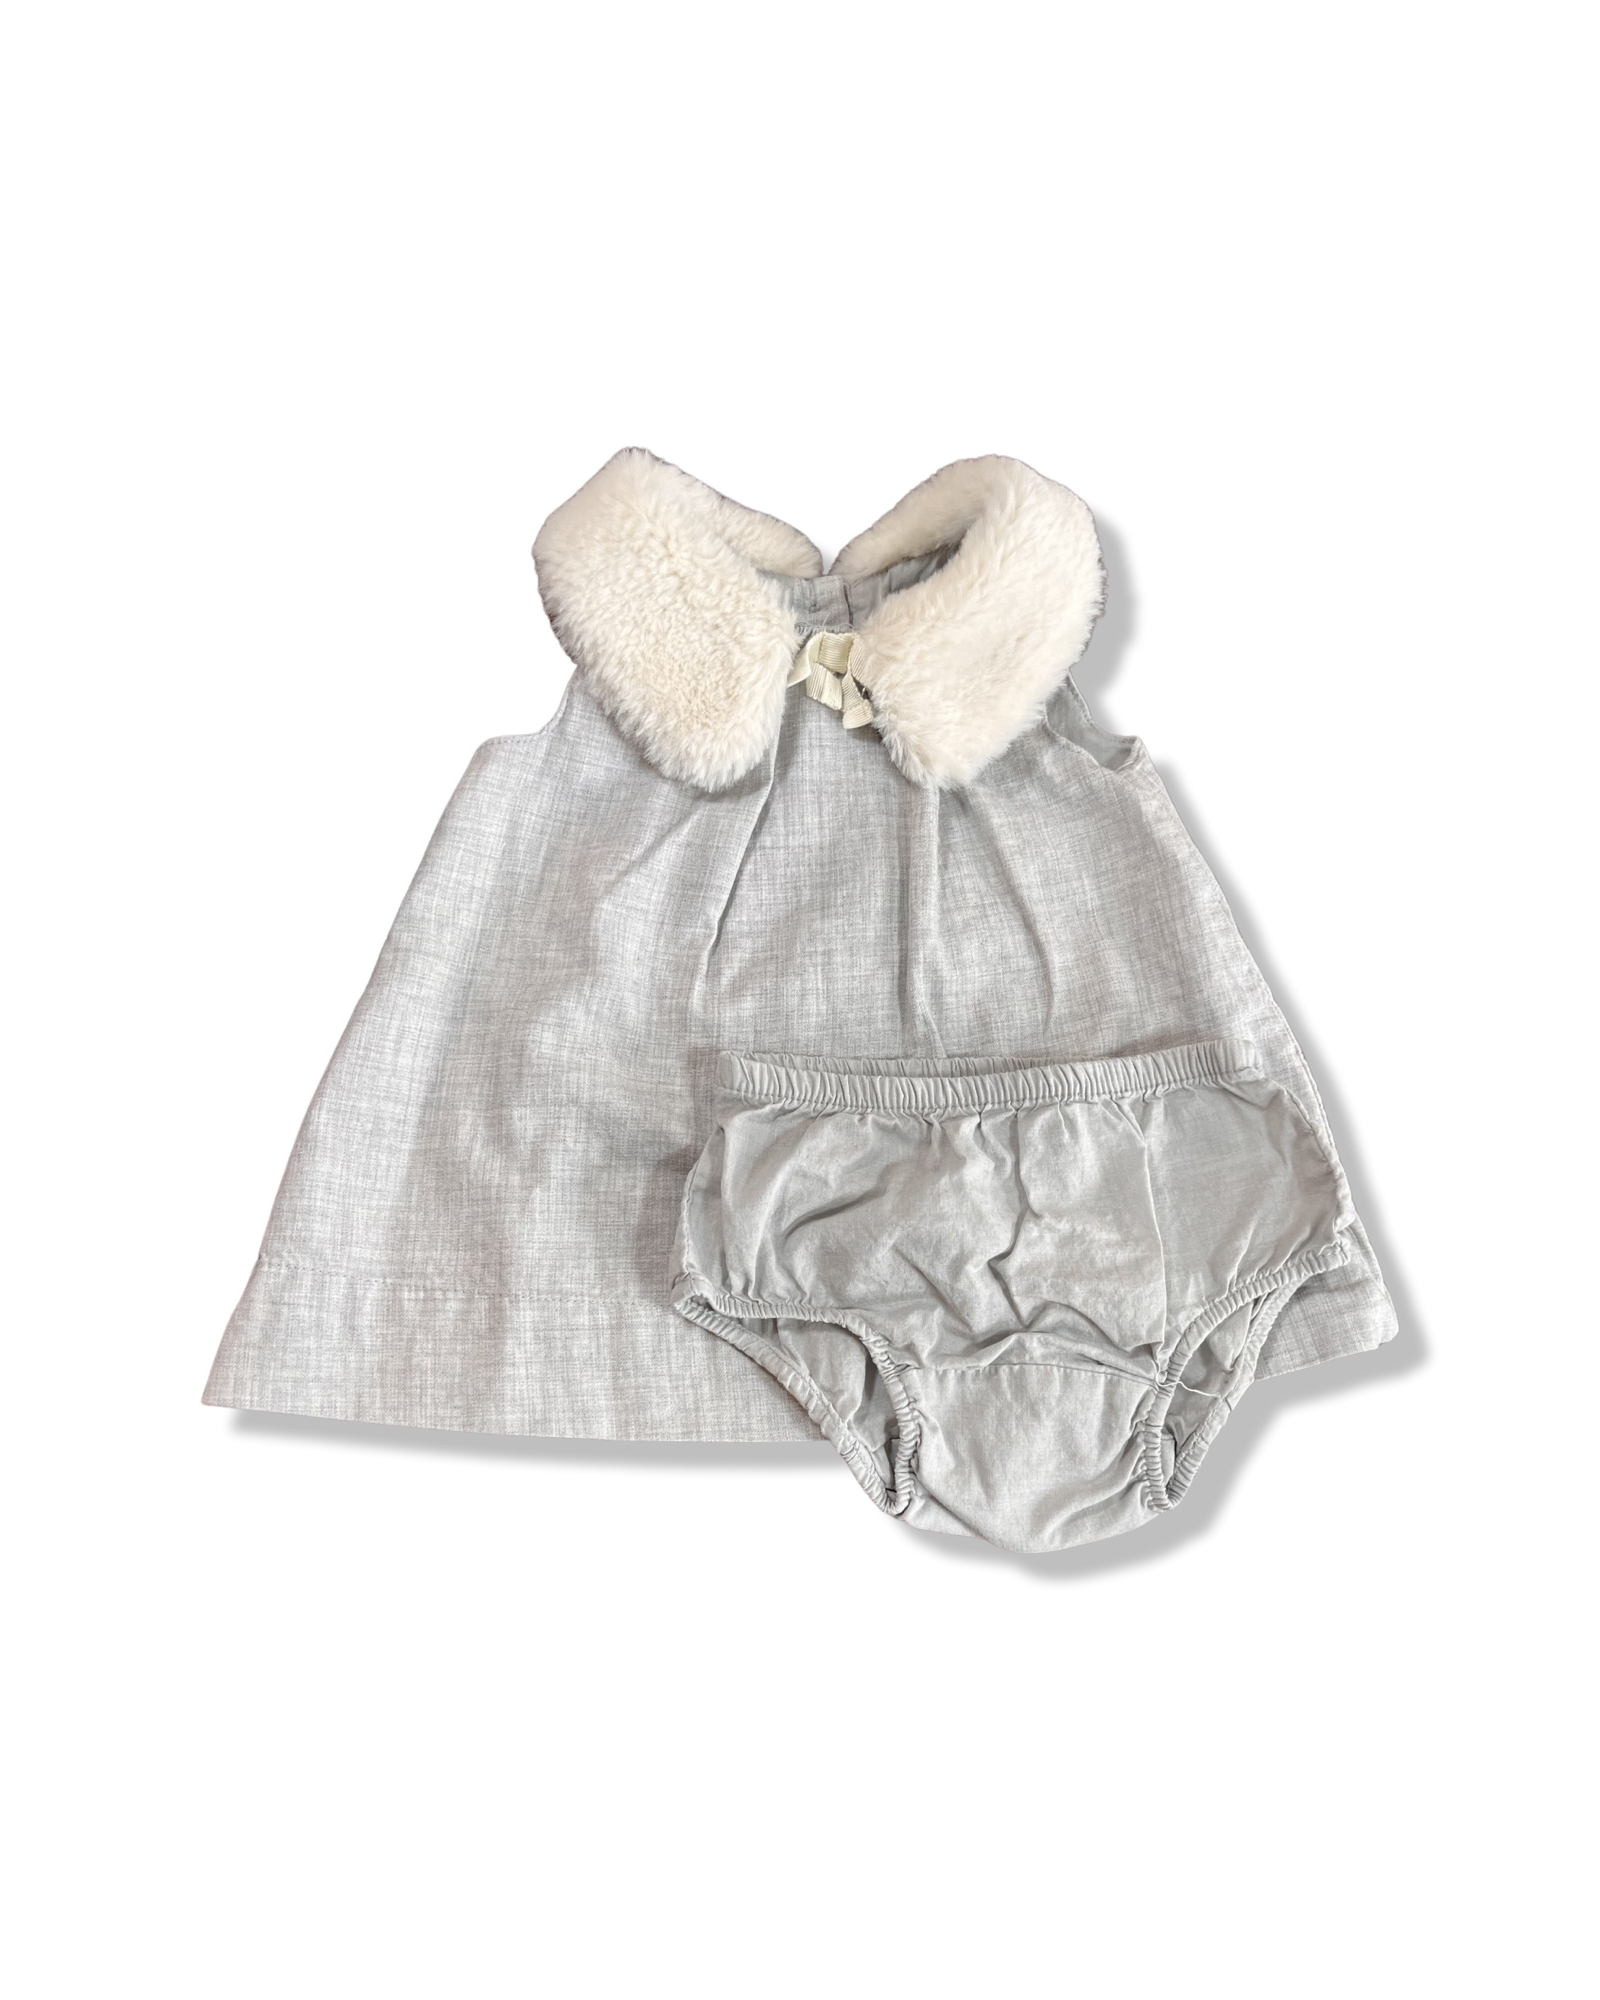 Baby Gap Dress with Fur Collar and Diaper Cover (0-3M)